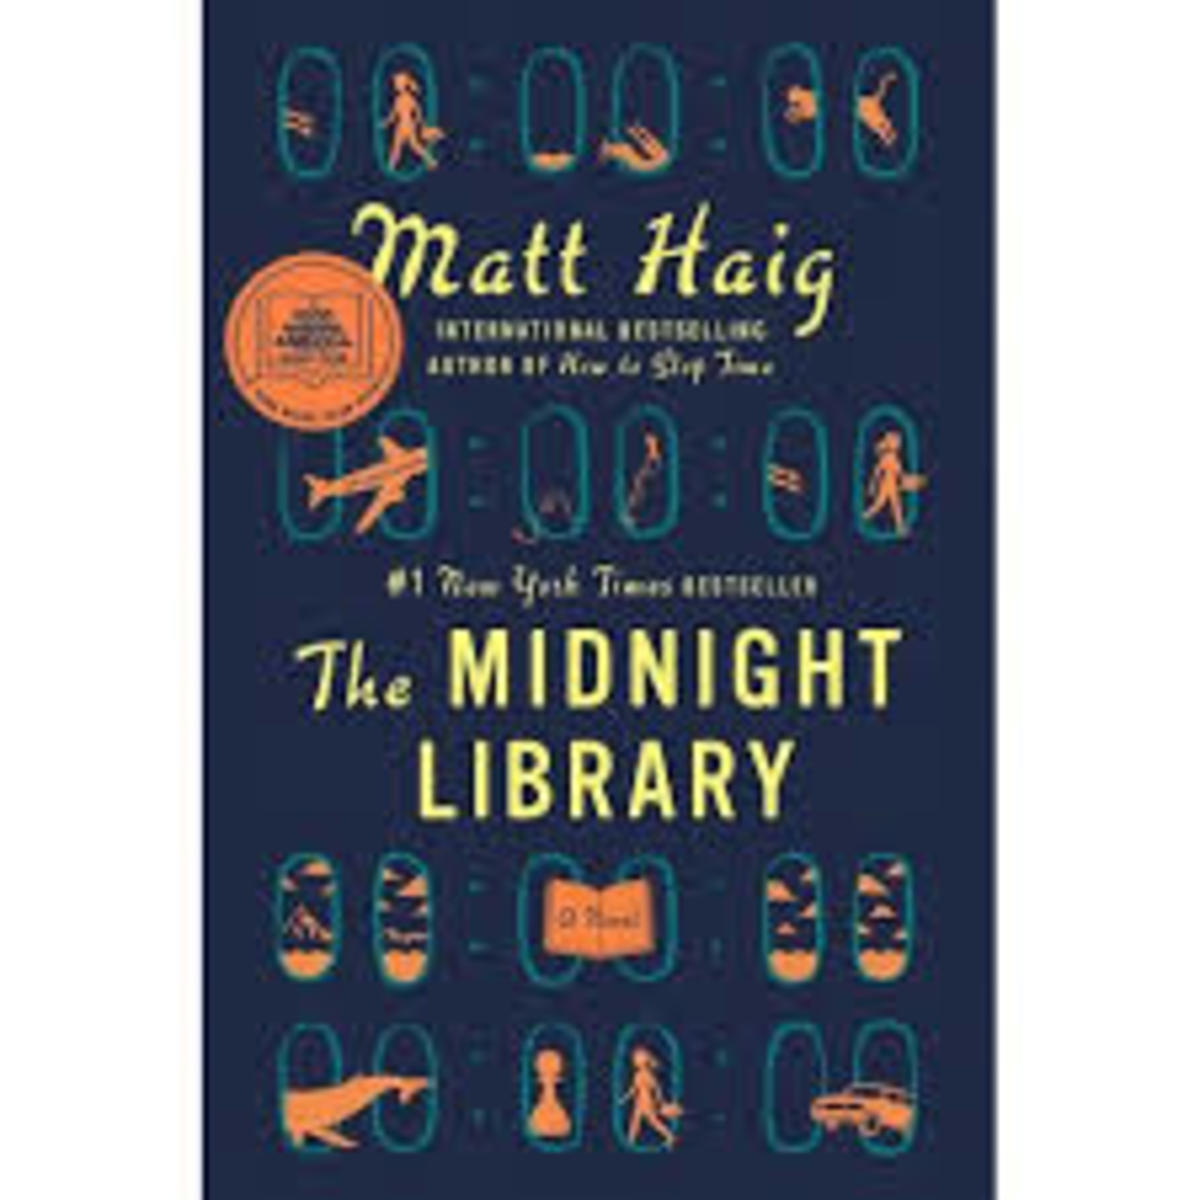 My Thoughts on the Actual Genre of the Midnight Library of Matt Haig